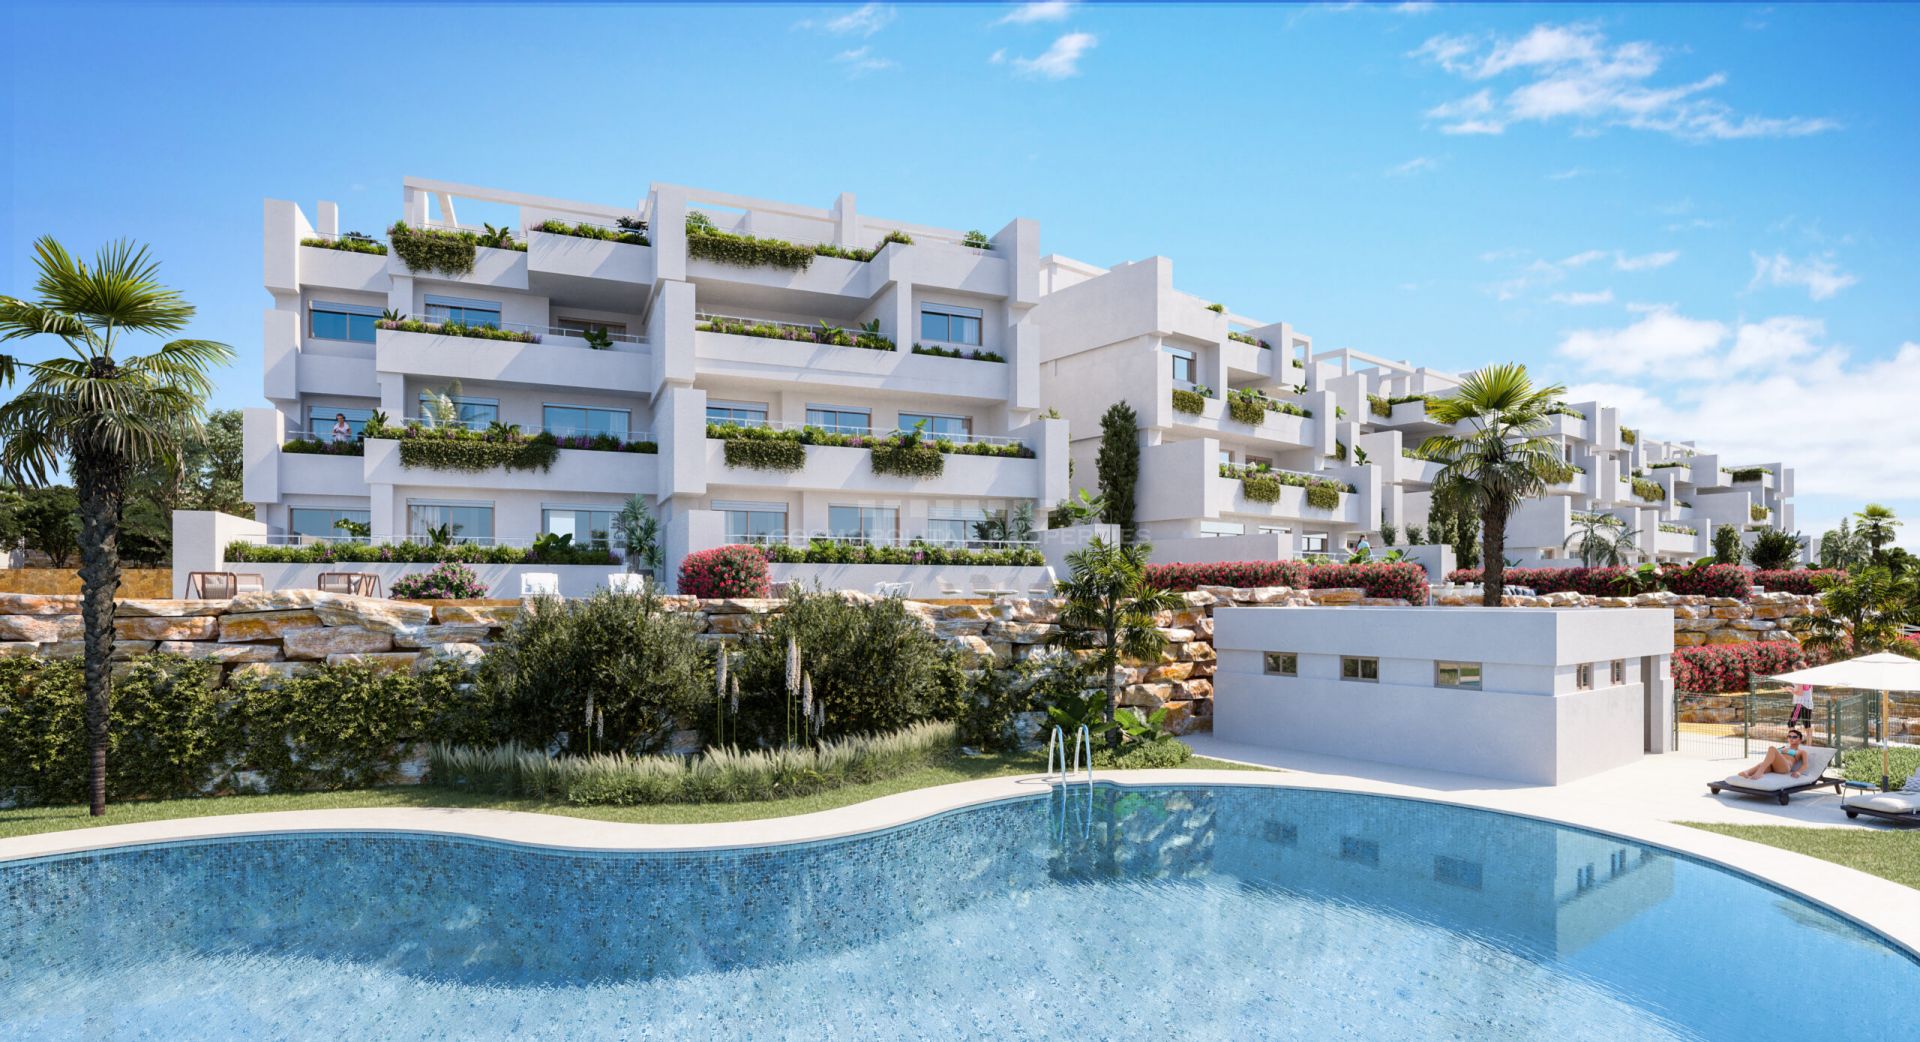 Aby Estepona, apartments and duplex penthouses in a privileged location in Arroyo Vaquero